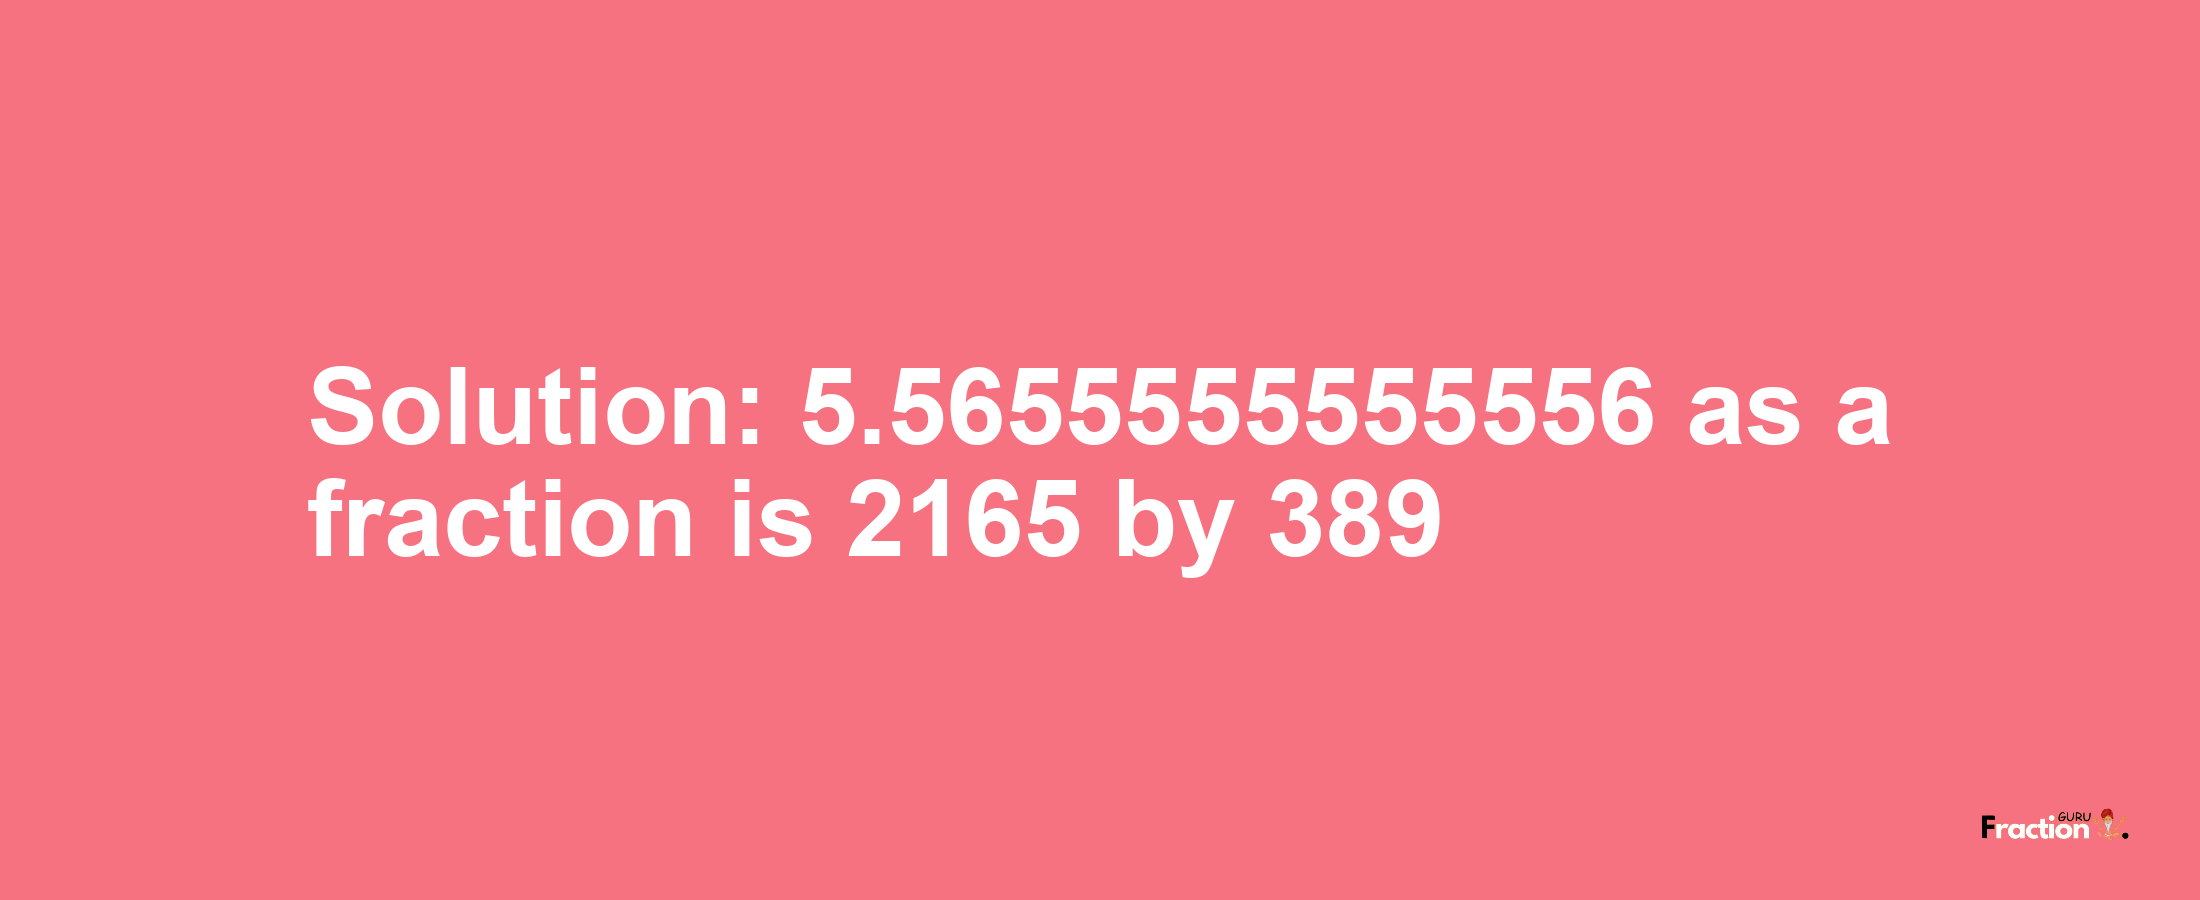 Solution:5.5655555555556 as a fraction is 2165/389